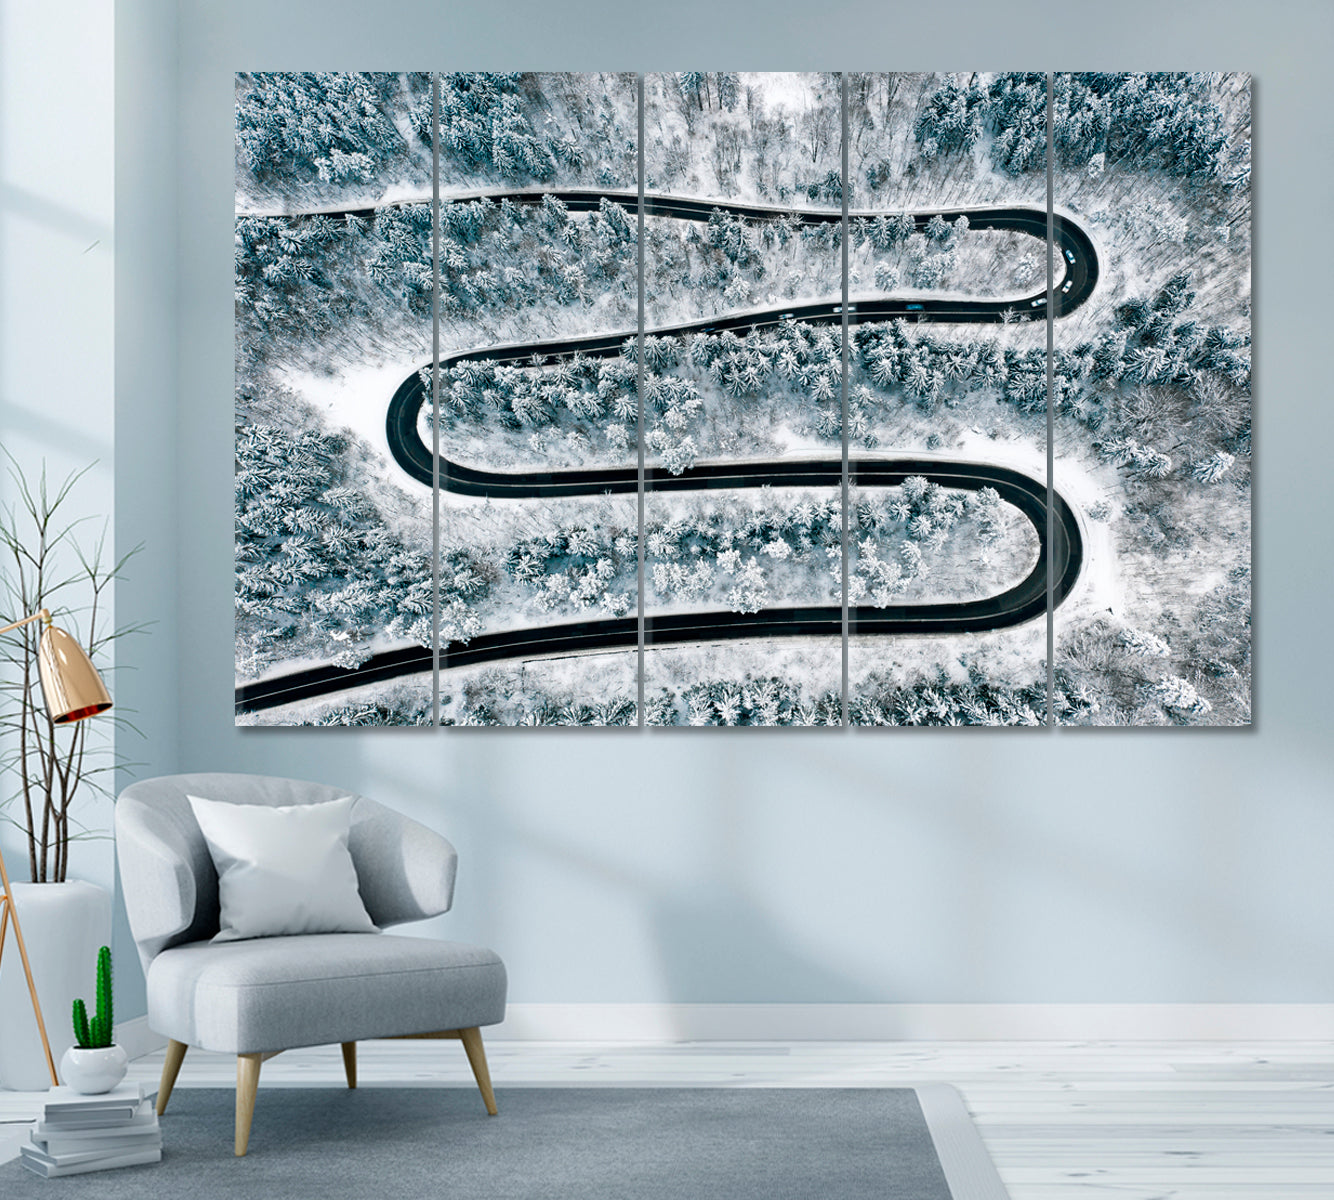 Winding Road in Winter Forest Canvas Print ArtLexy 5 Panels 36"x24" inches 